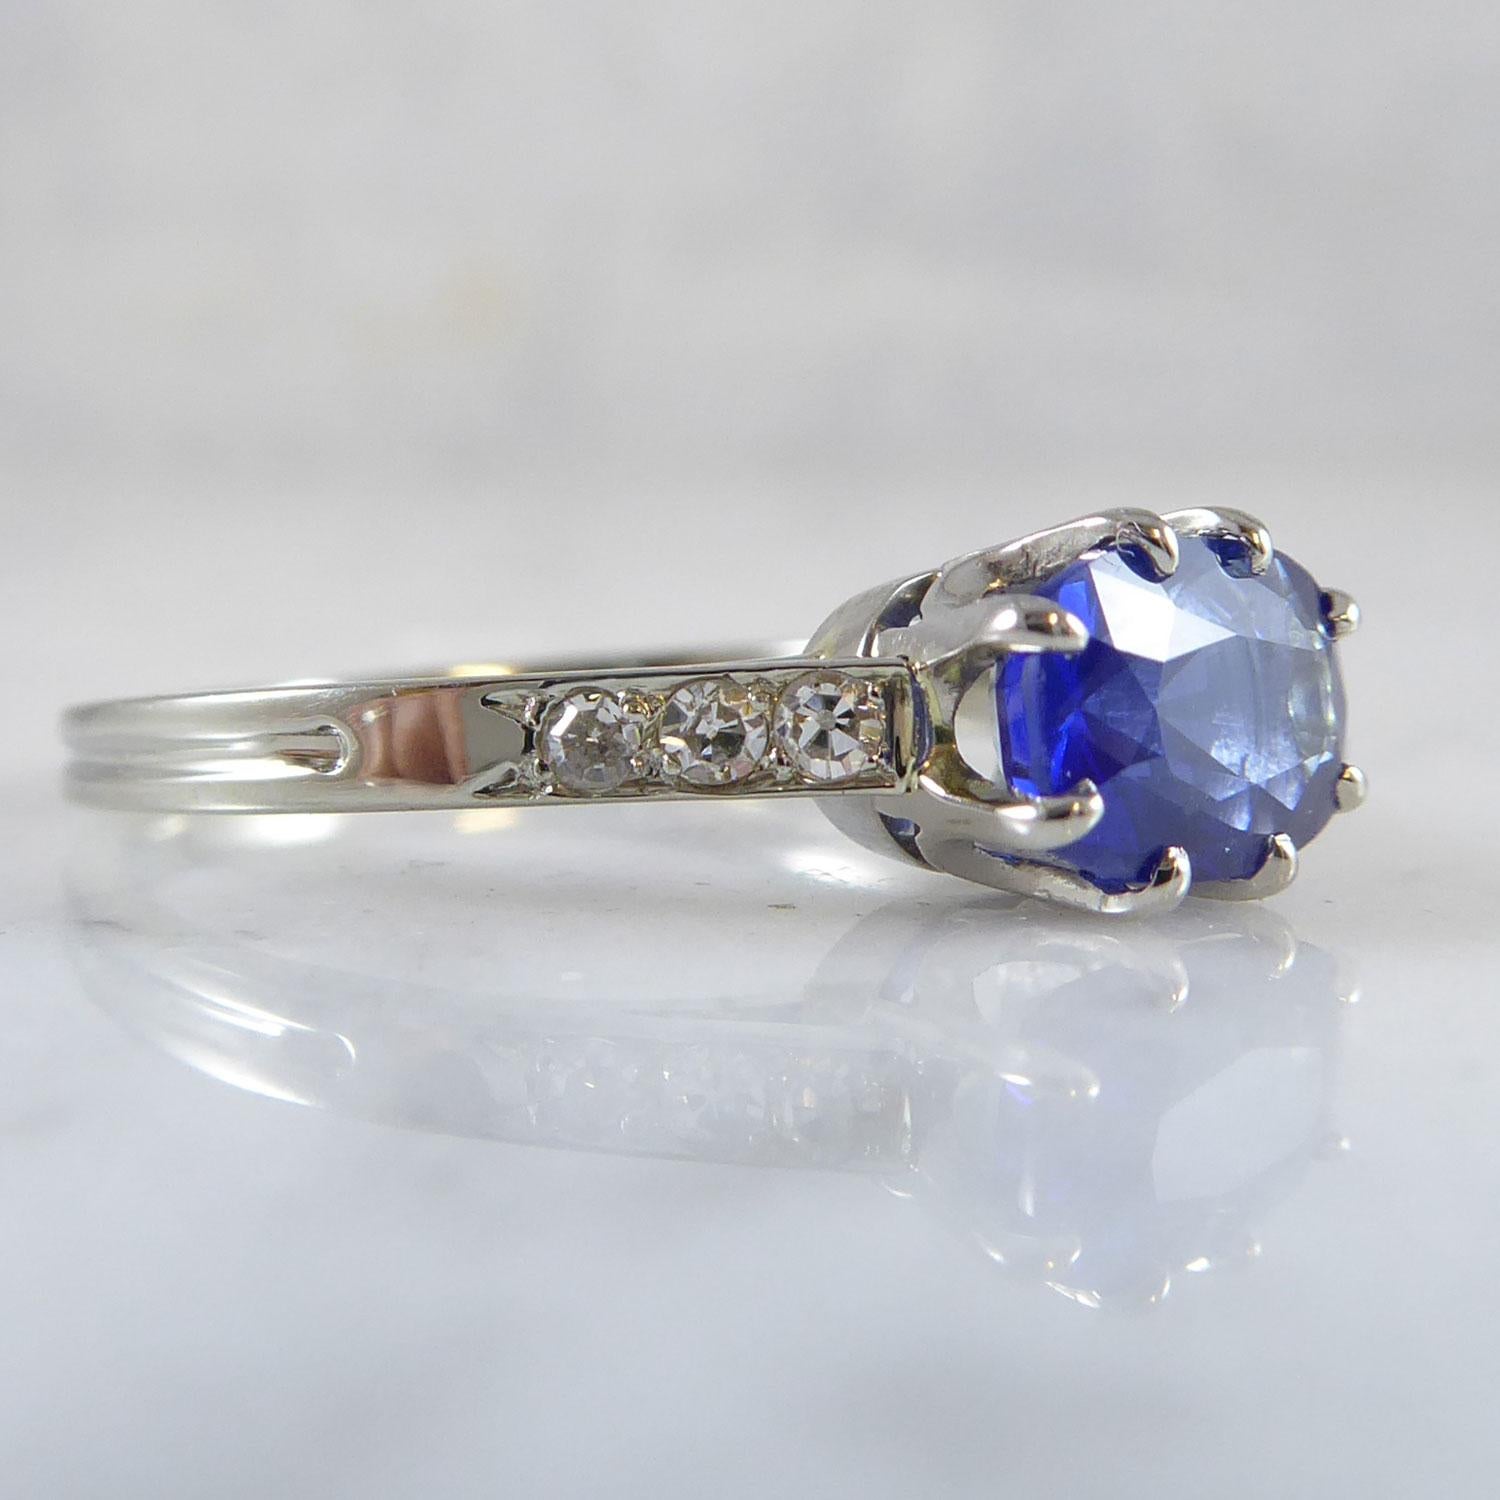 Contemporary 1.41 Carat Sapphire Ring with Diamond Set Shoulders, French In Good Condition In Yorkshire, West Yorkshire